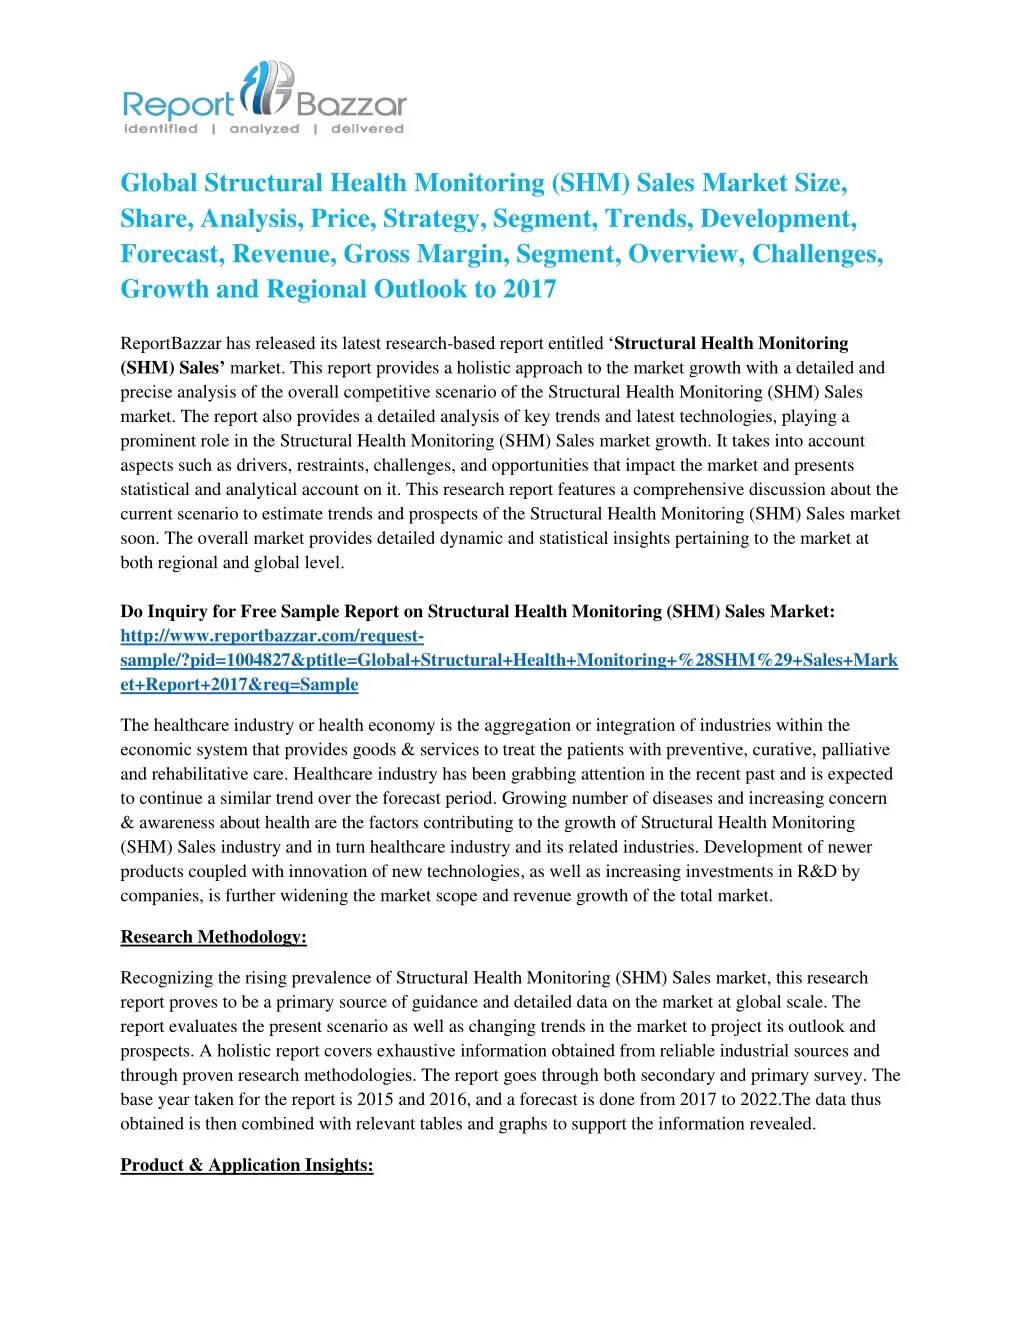 global structural health monitoring shm sales